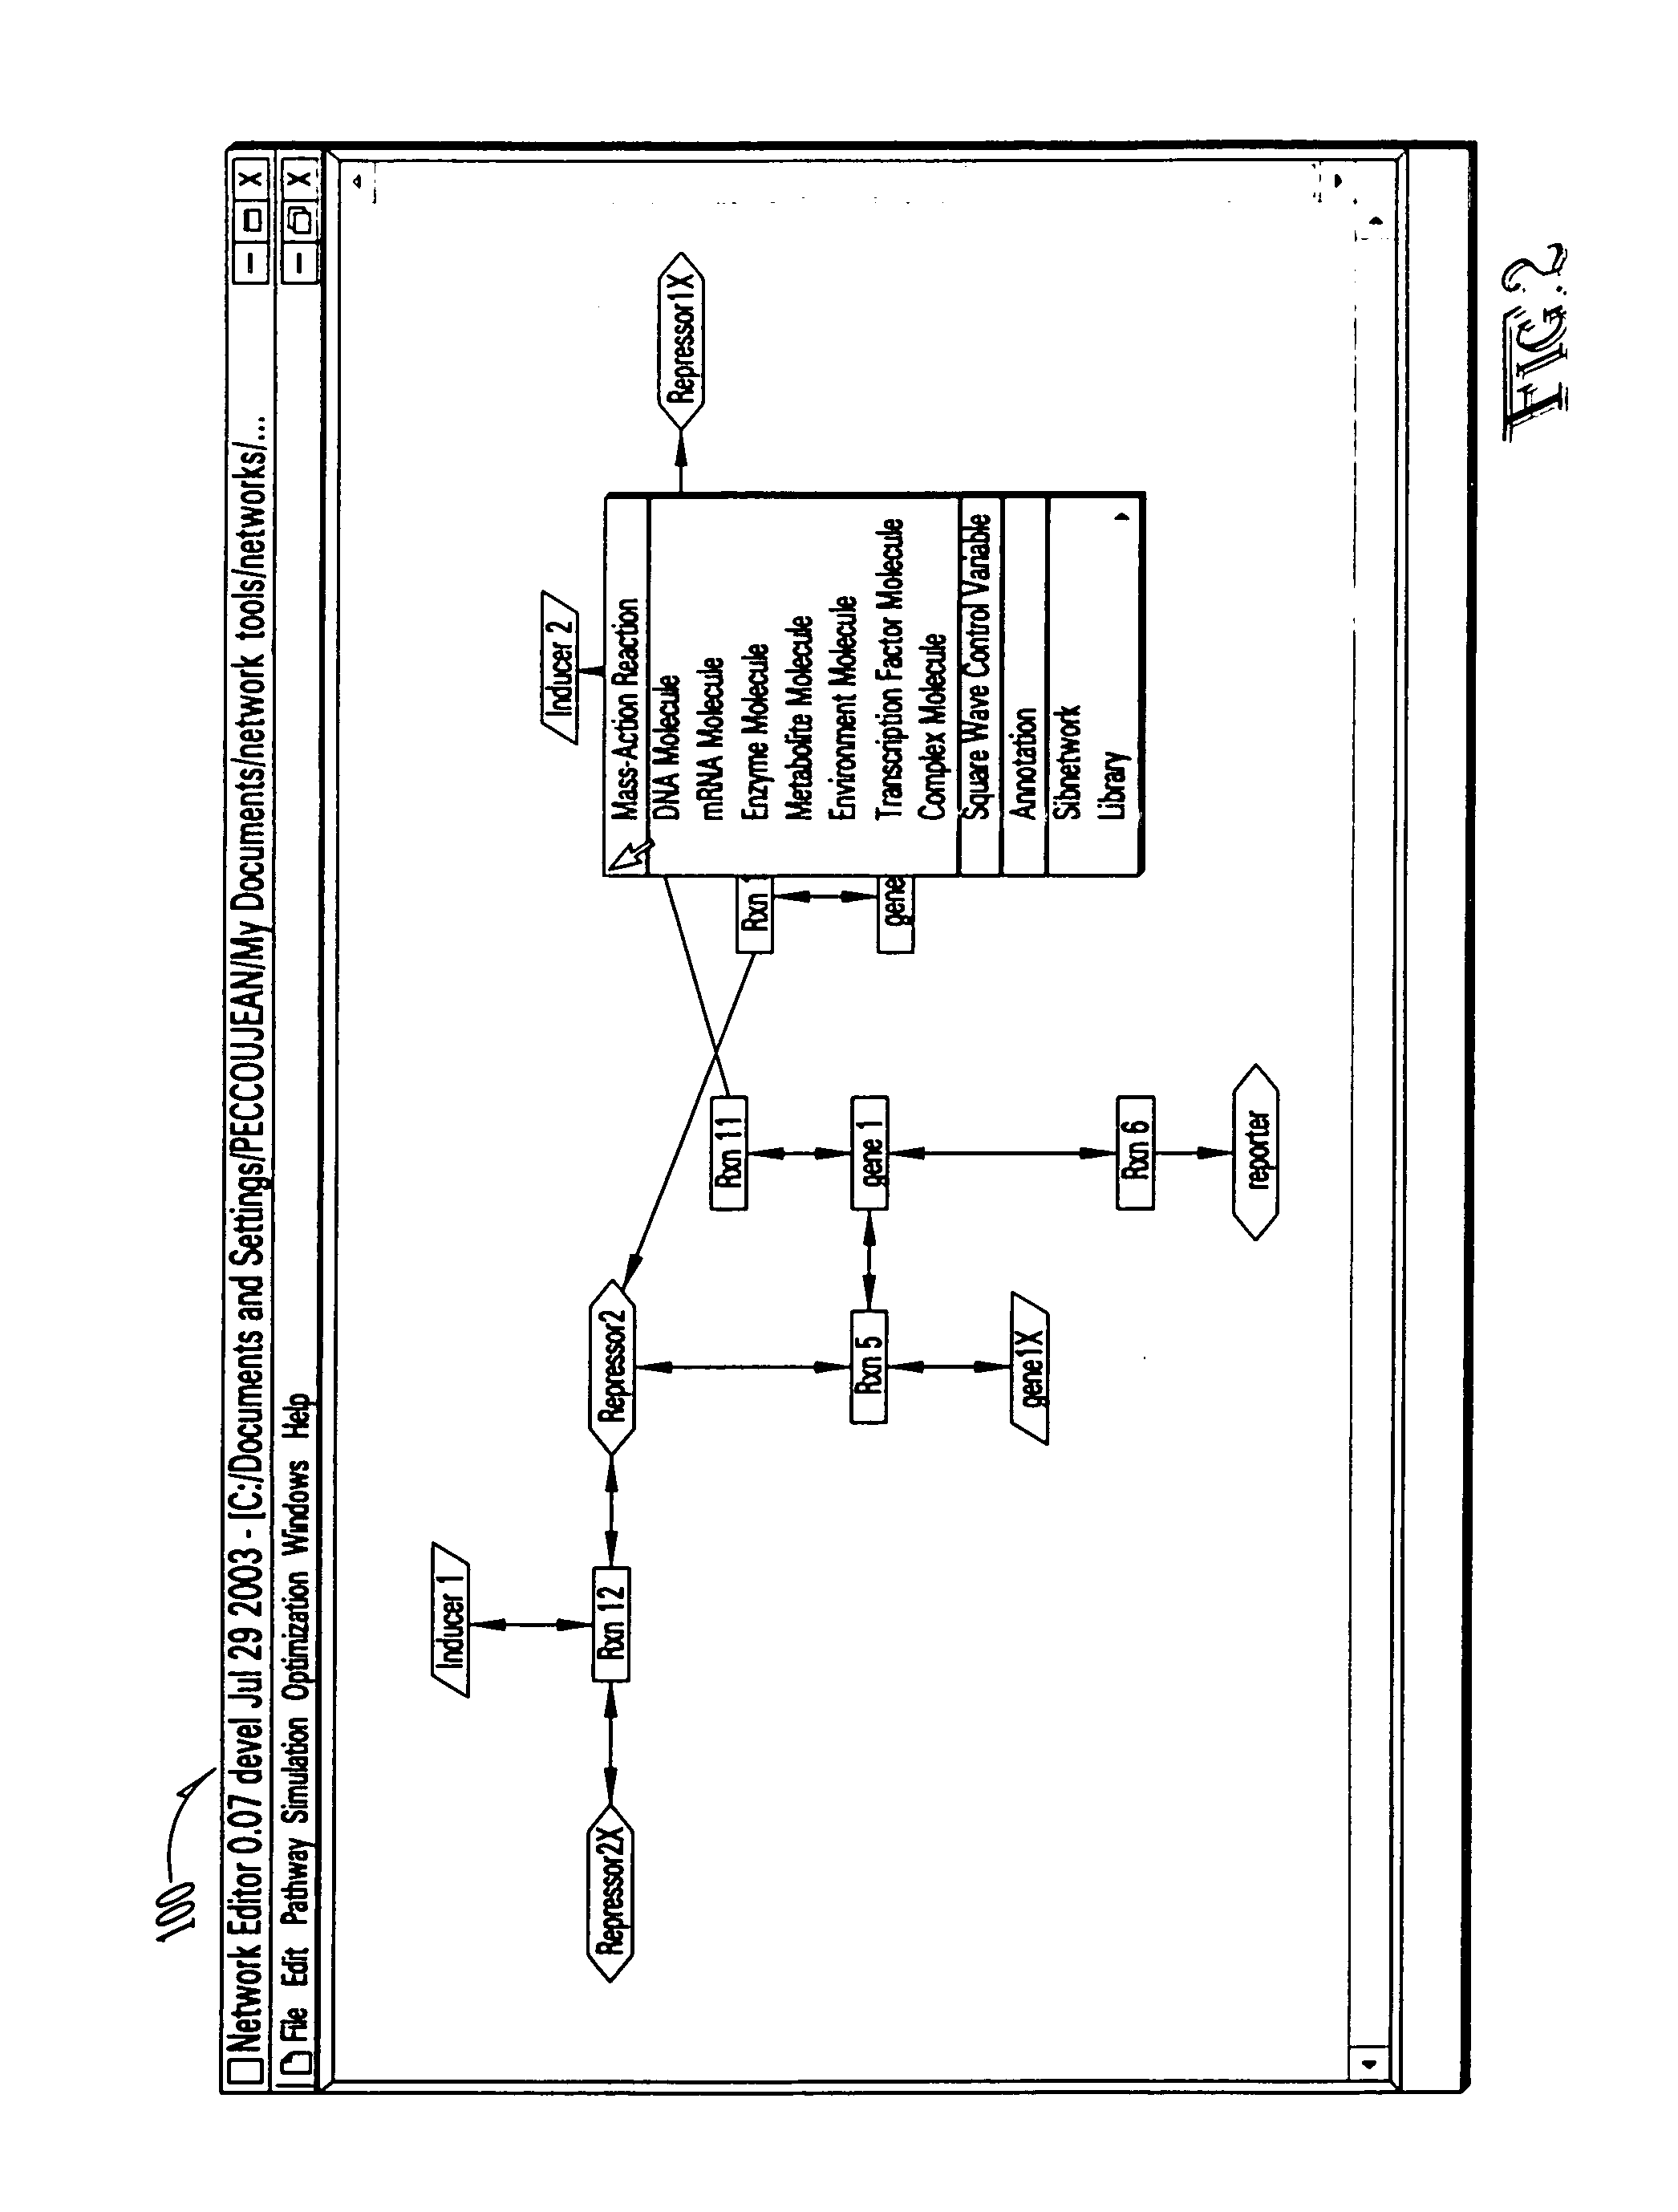 Computer systems and methods for genotype to phenotype mapping using molecular network models